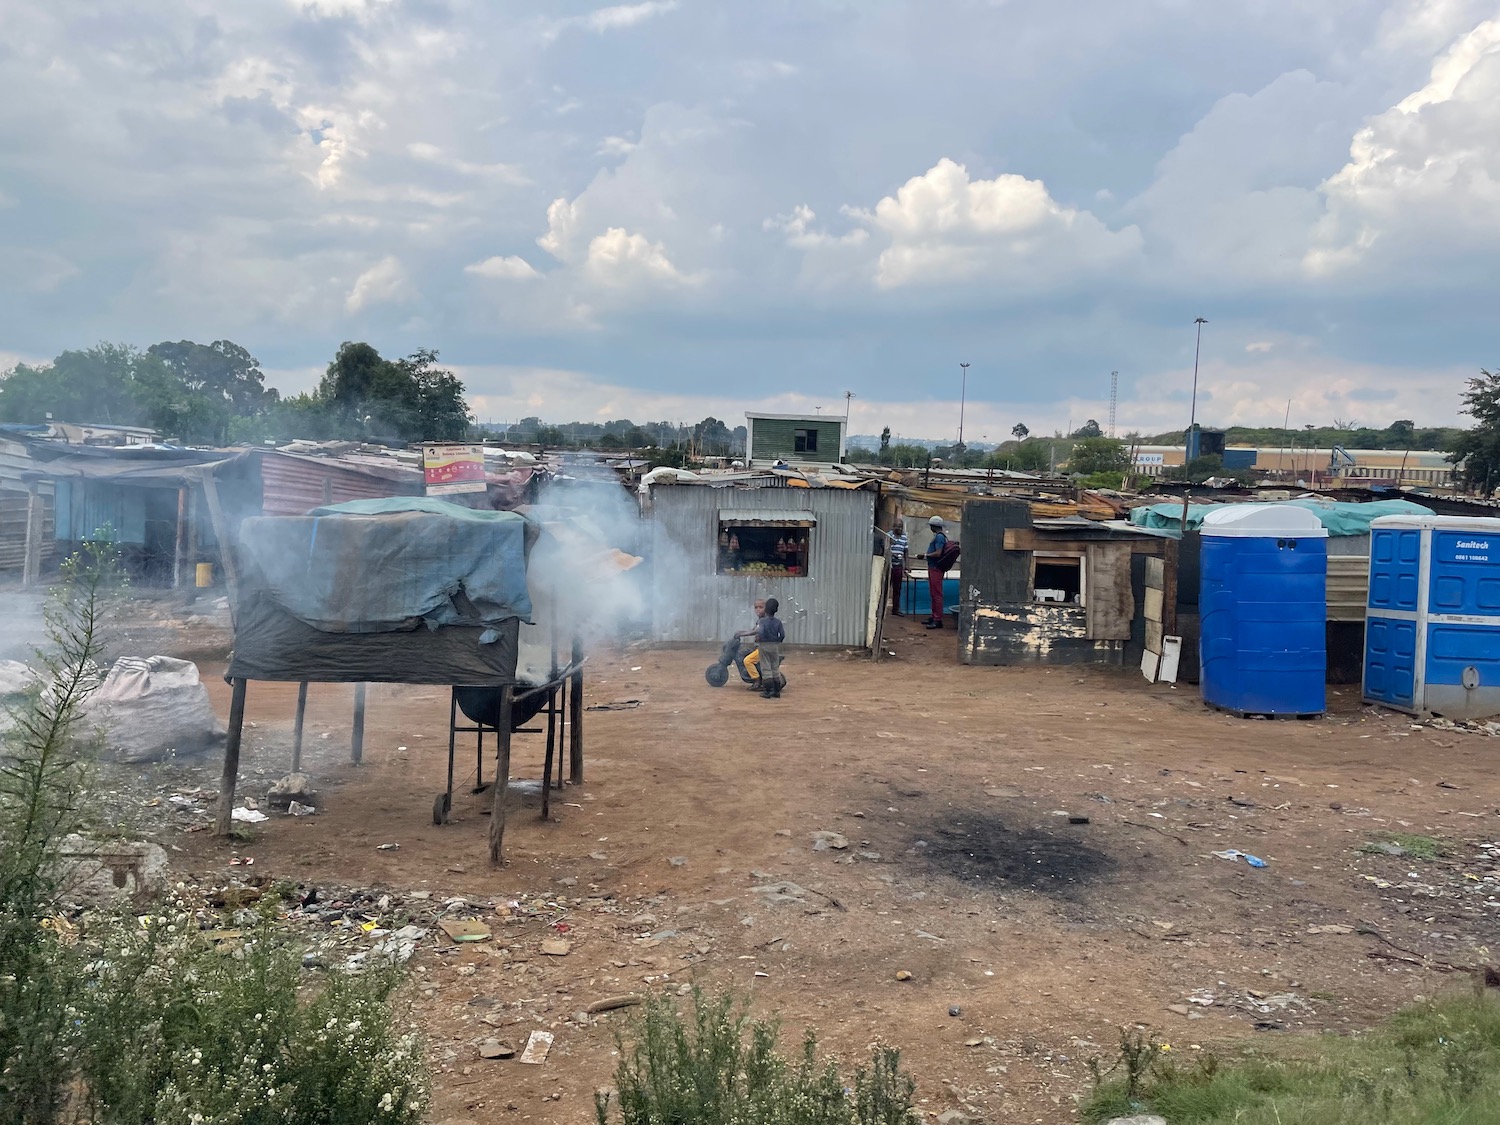 a group of people in a small area with a group of shacks